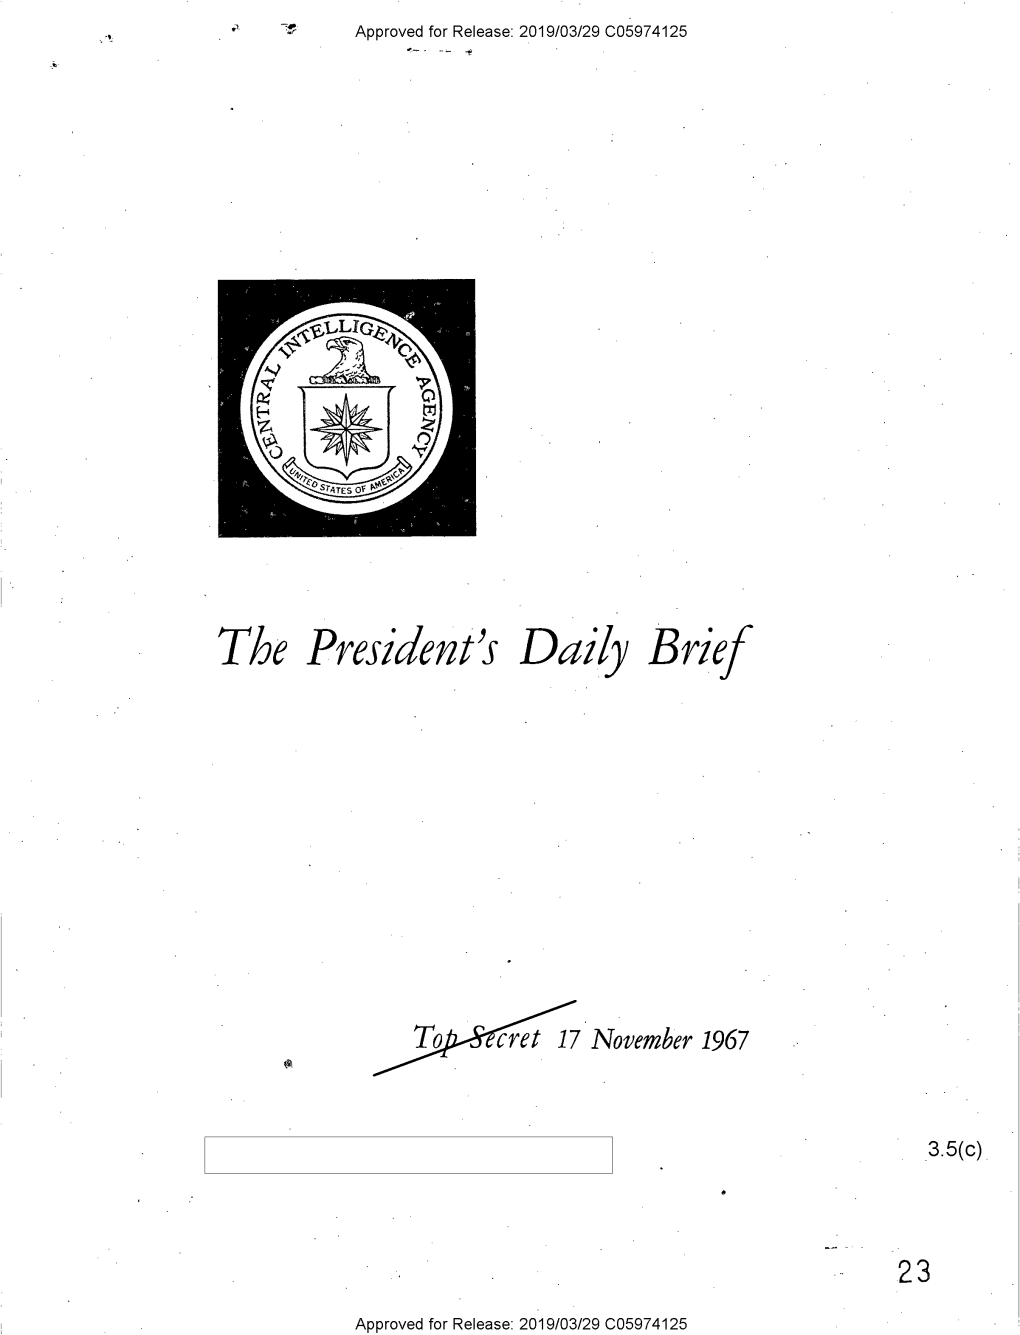 President's Daily Brief/ Special Daily Report, 17 November 1967